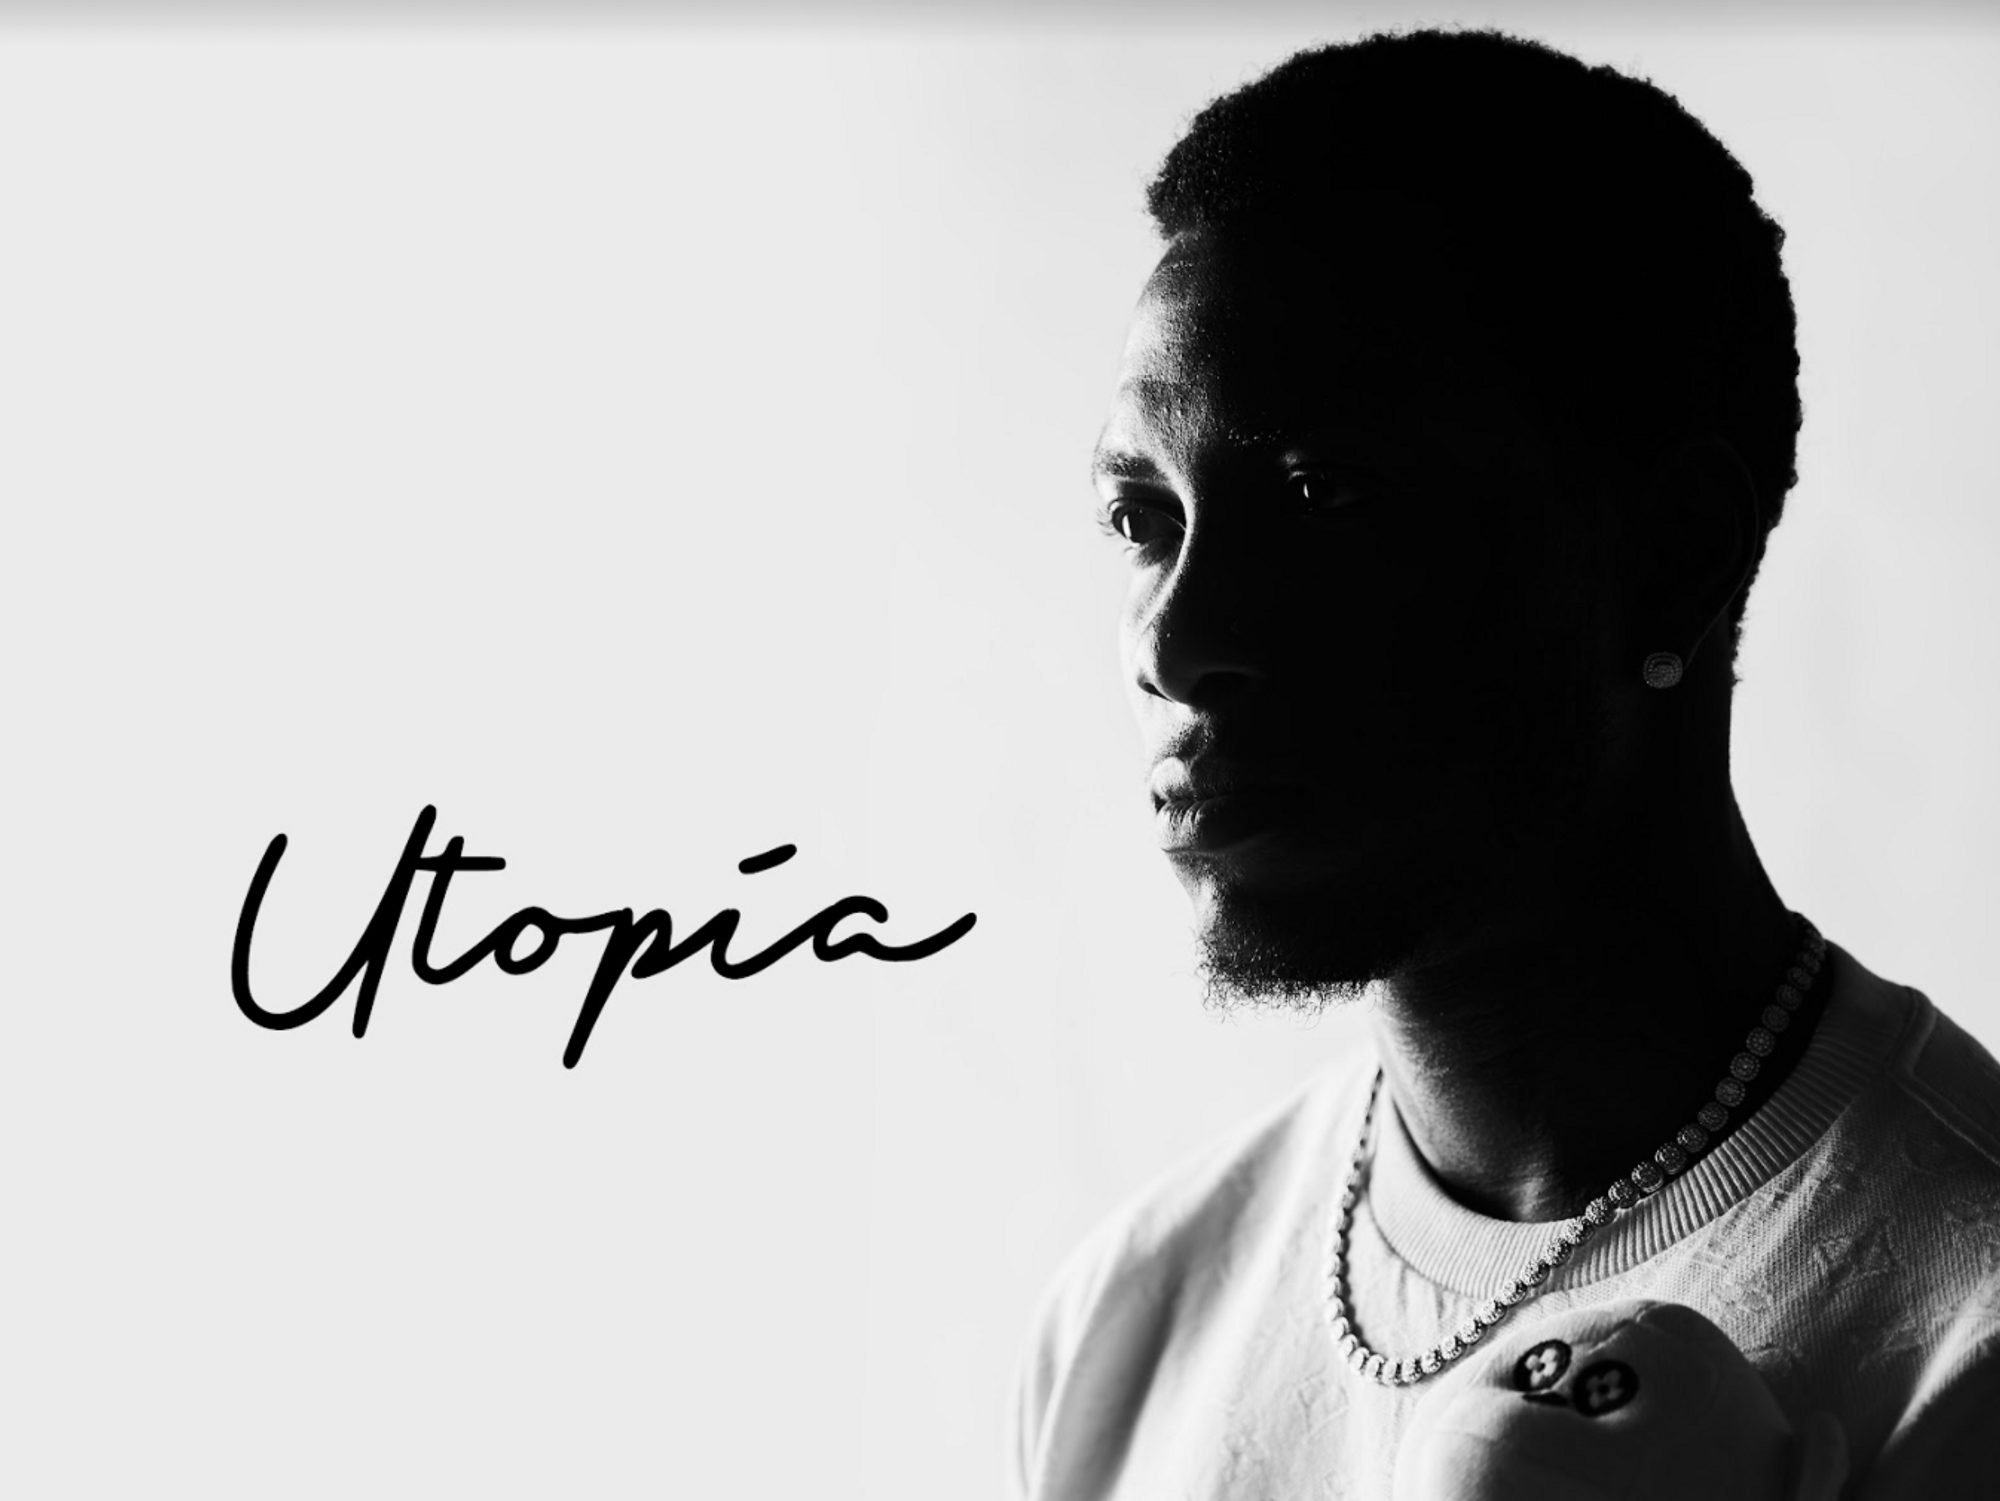 Savage Sets the Tone of His Career With Debut Album 'Utopia'